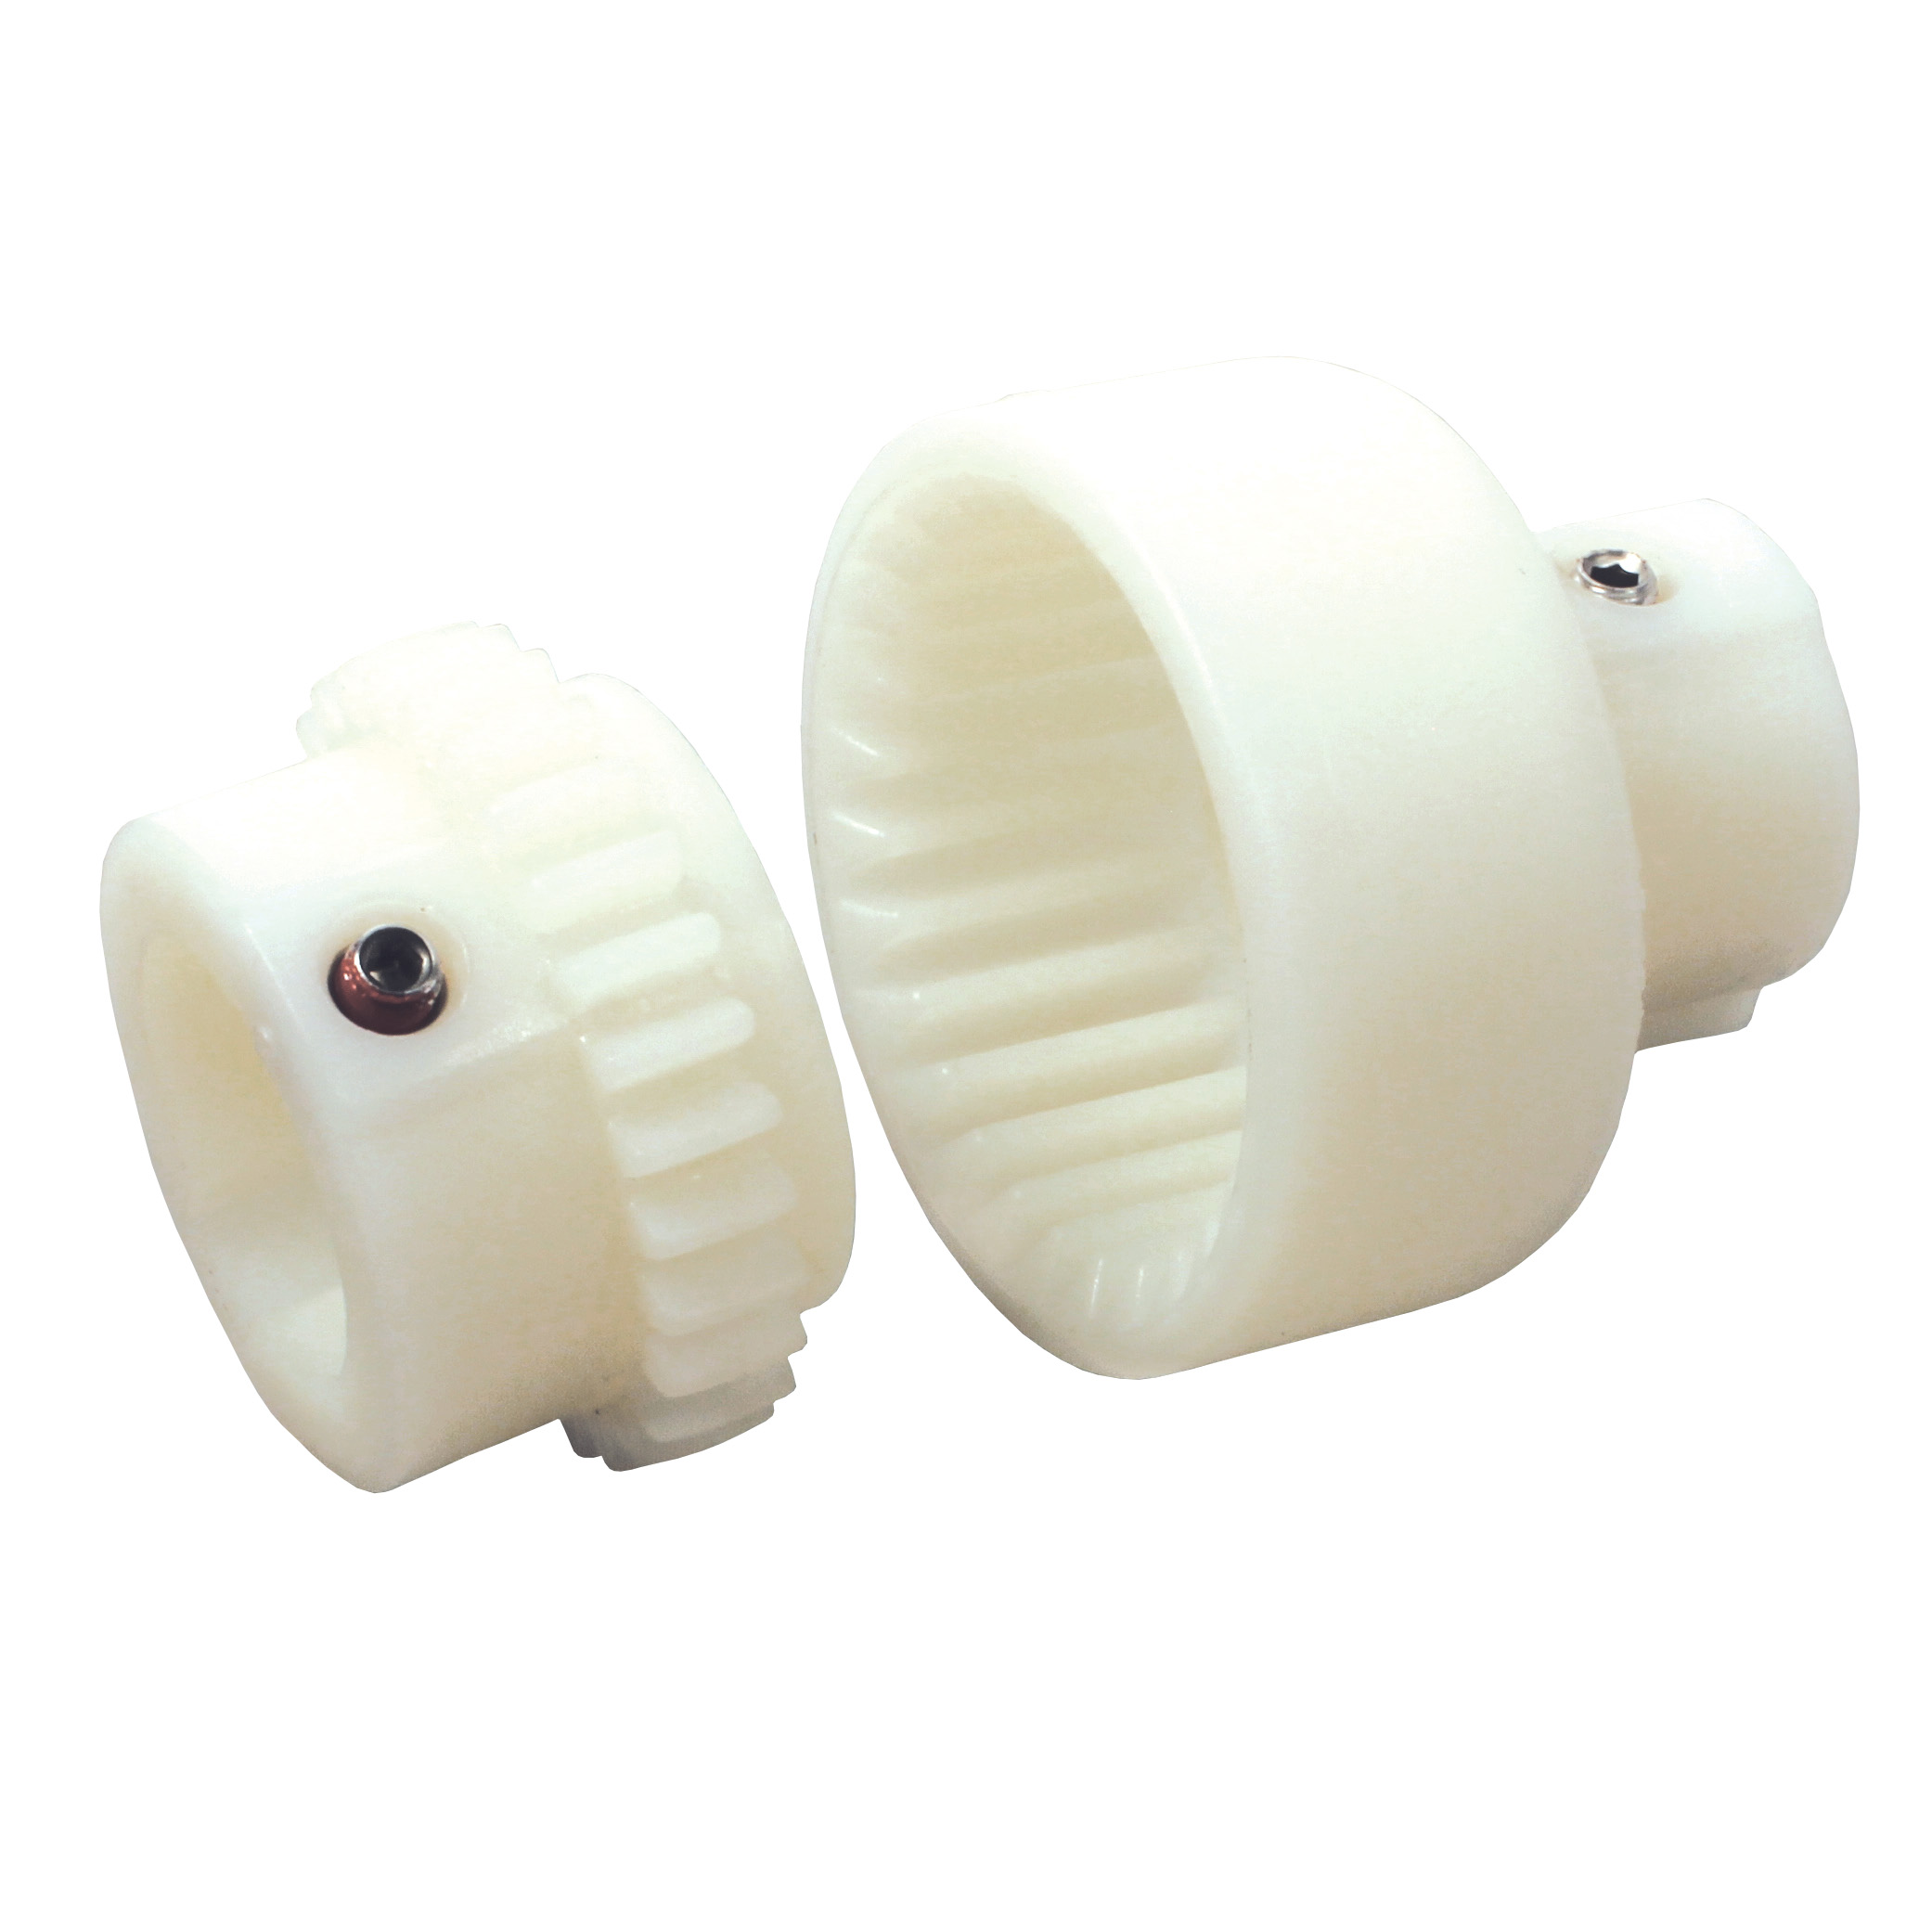 BoWex® curved tooth gear coupling - Nylon - 2 pieces - 